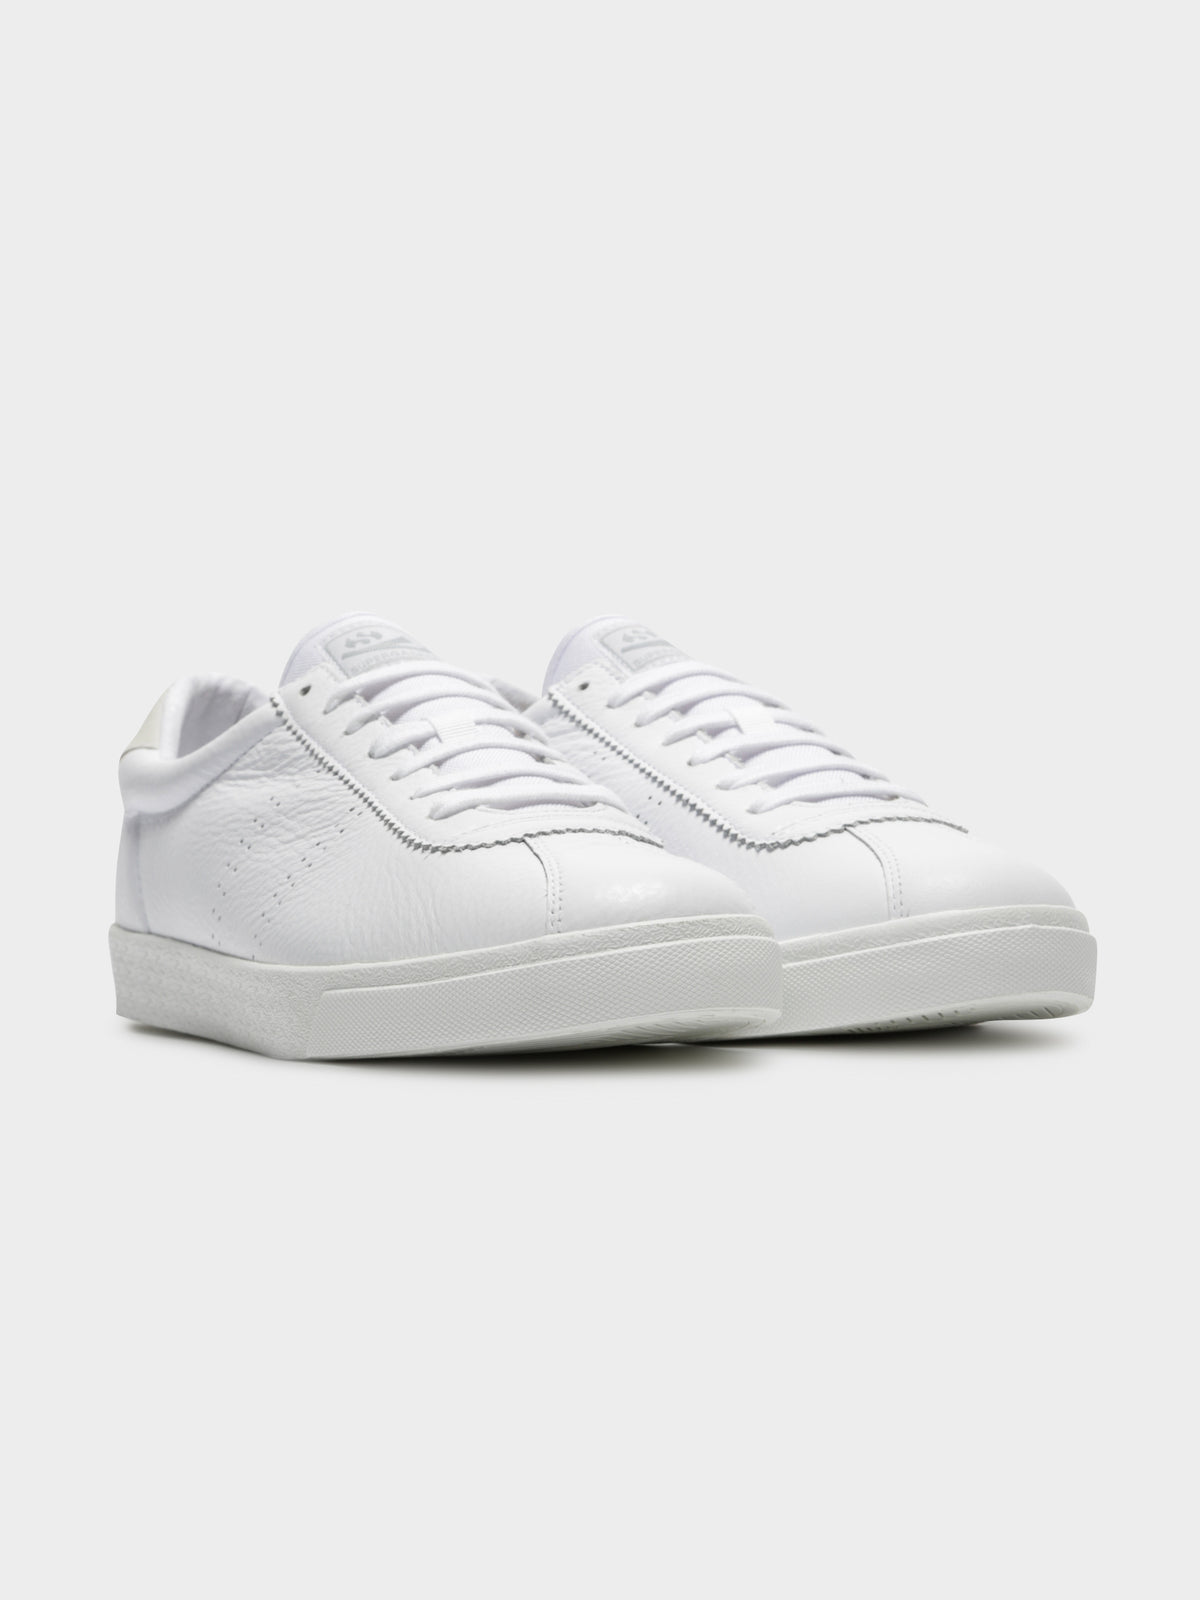 Mens 2843 Clubs Comfleau Sneakers in White